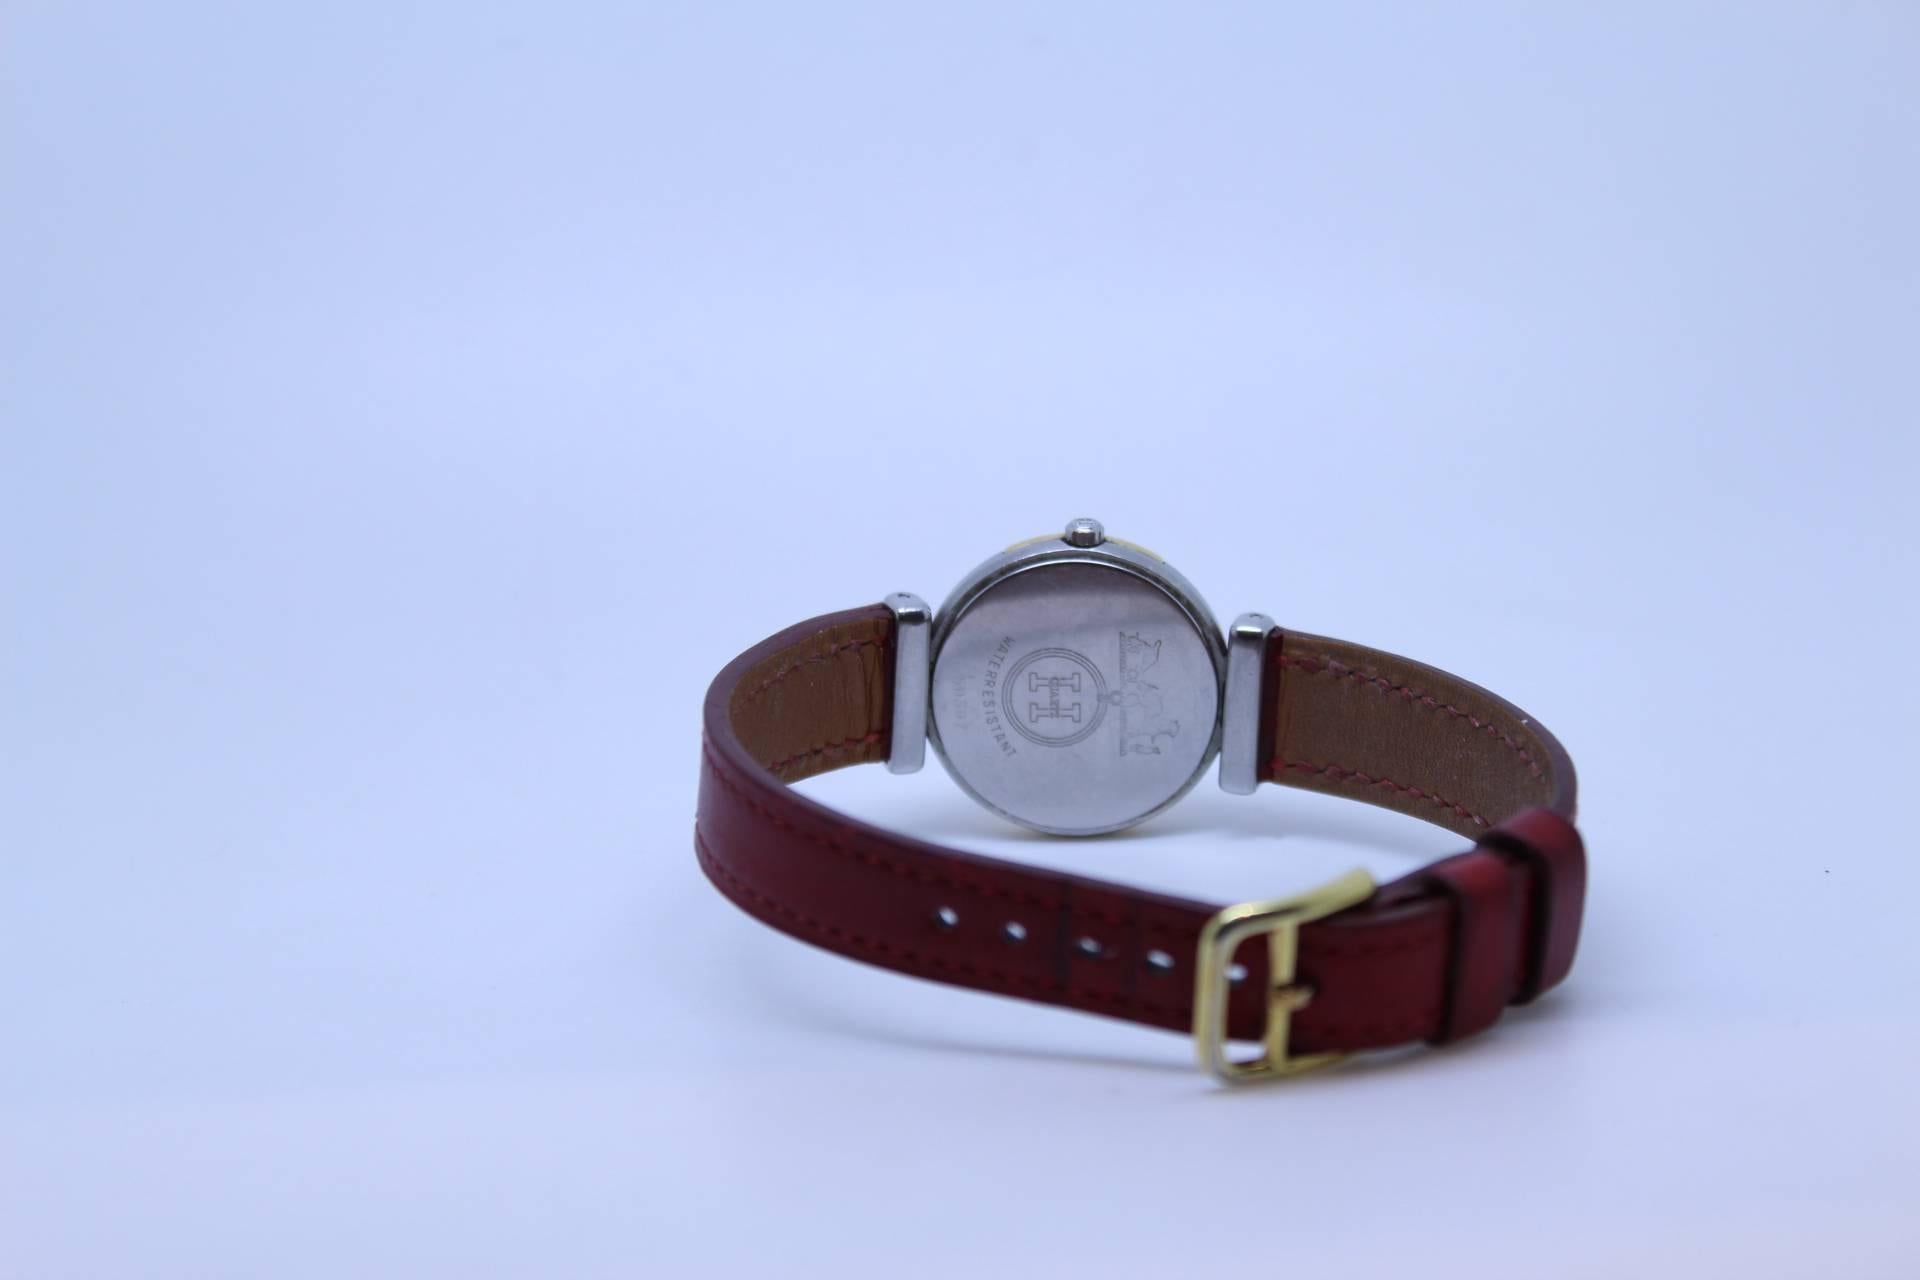 Hermes Profil watch in steel and gold plated bezel.

Red leather band.

Some signs of wear in the band.

Good working condition